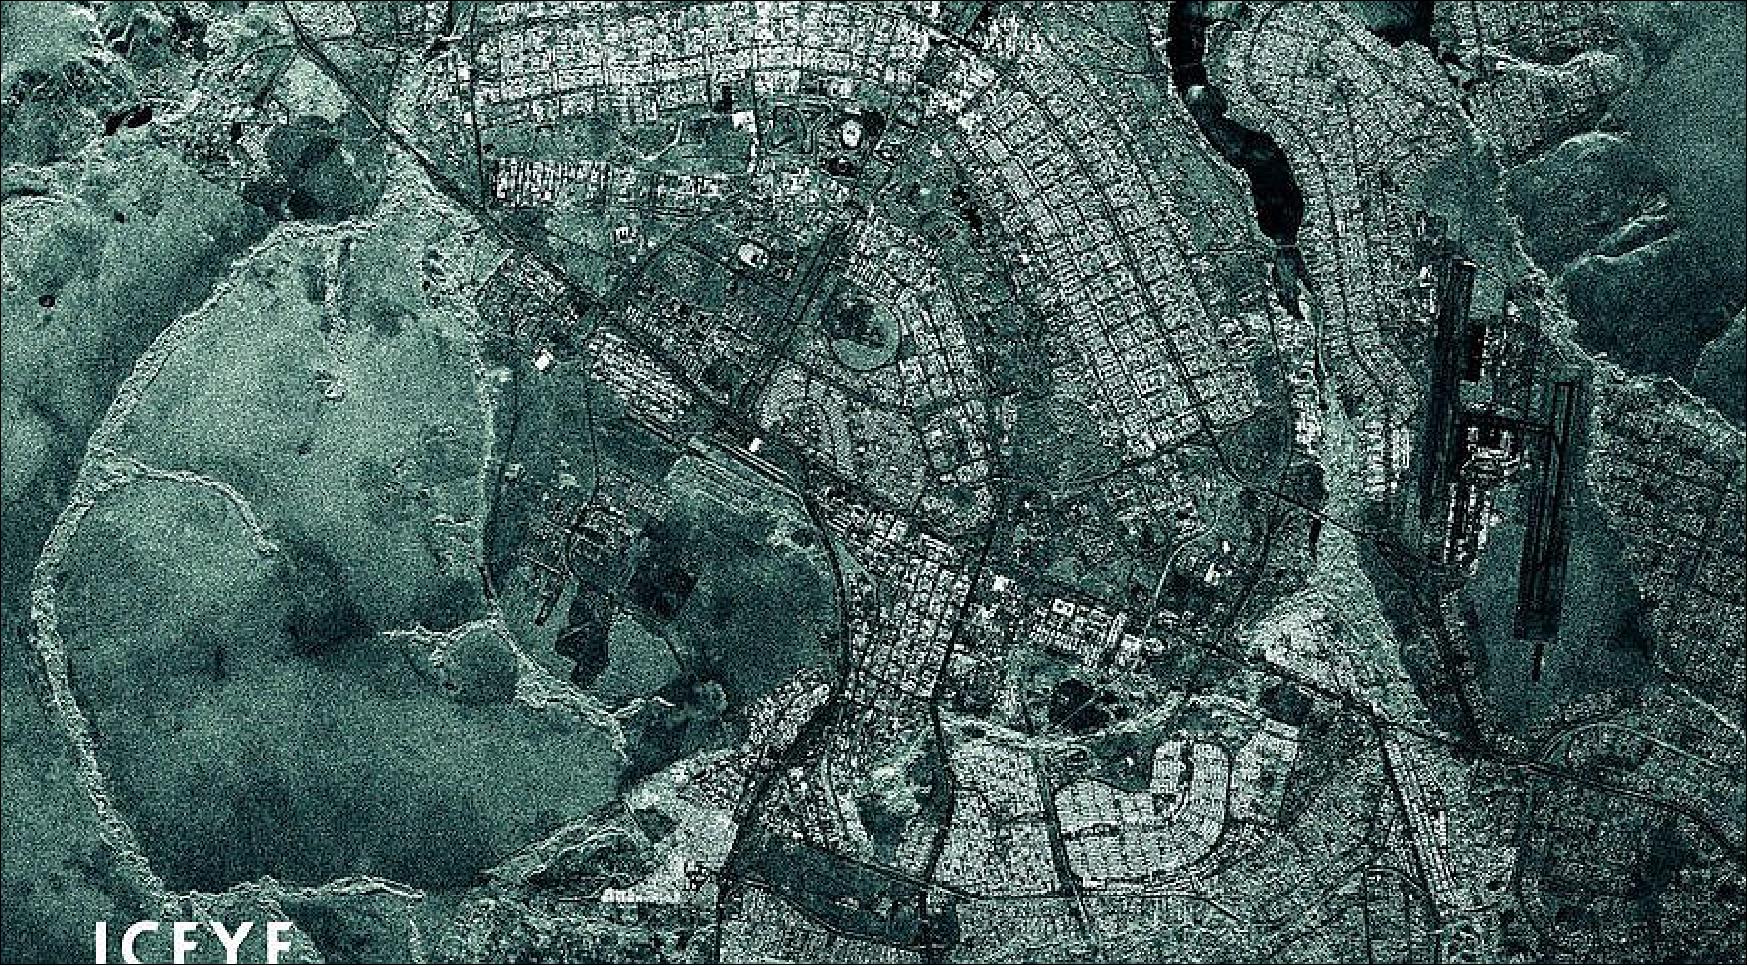 Figure 37: ICEYE captured this three-meter resolution SAR image of Brazil's capital city Brasília earlier this year (image credit: ICEYE)